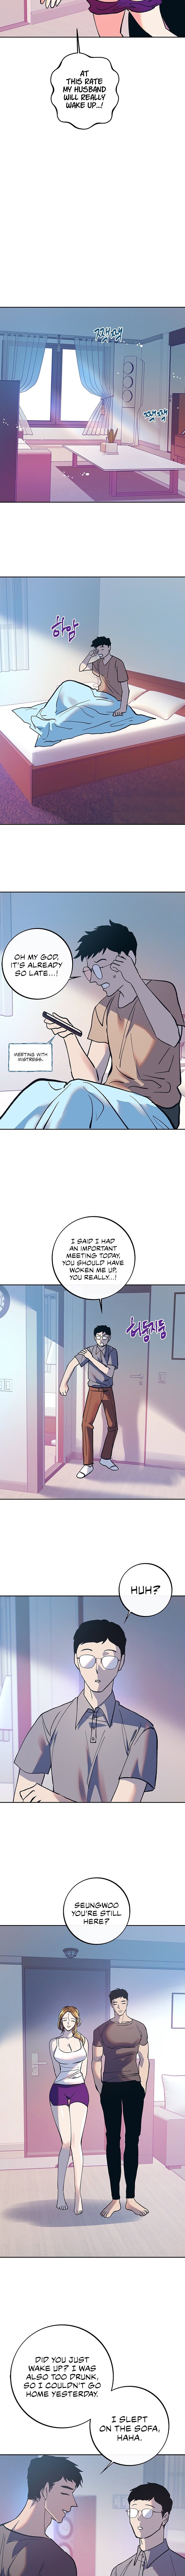 the-memories-of-that-summer-day-chap-32-6